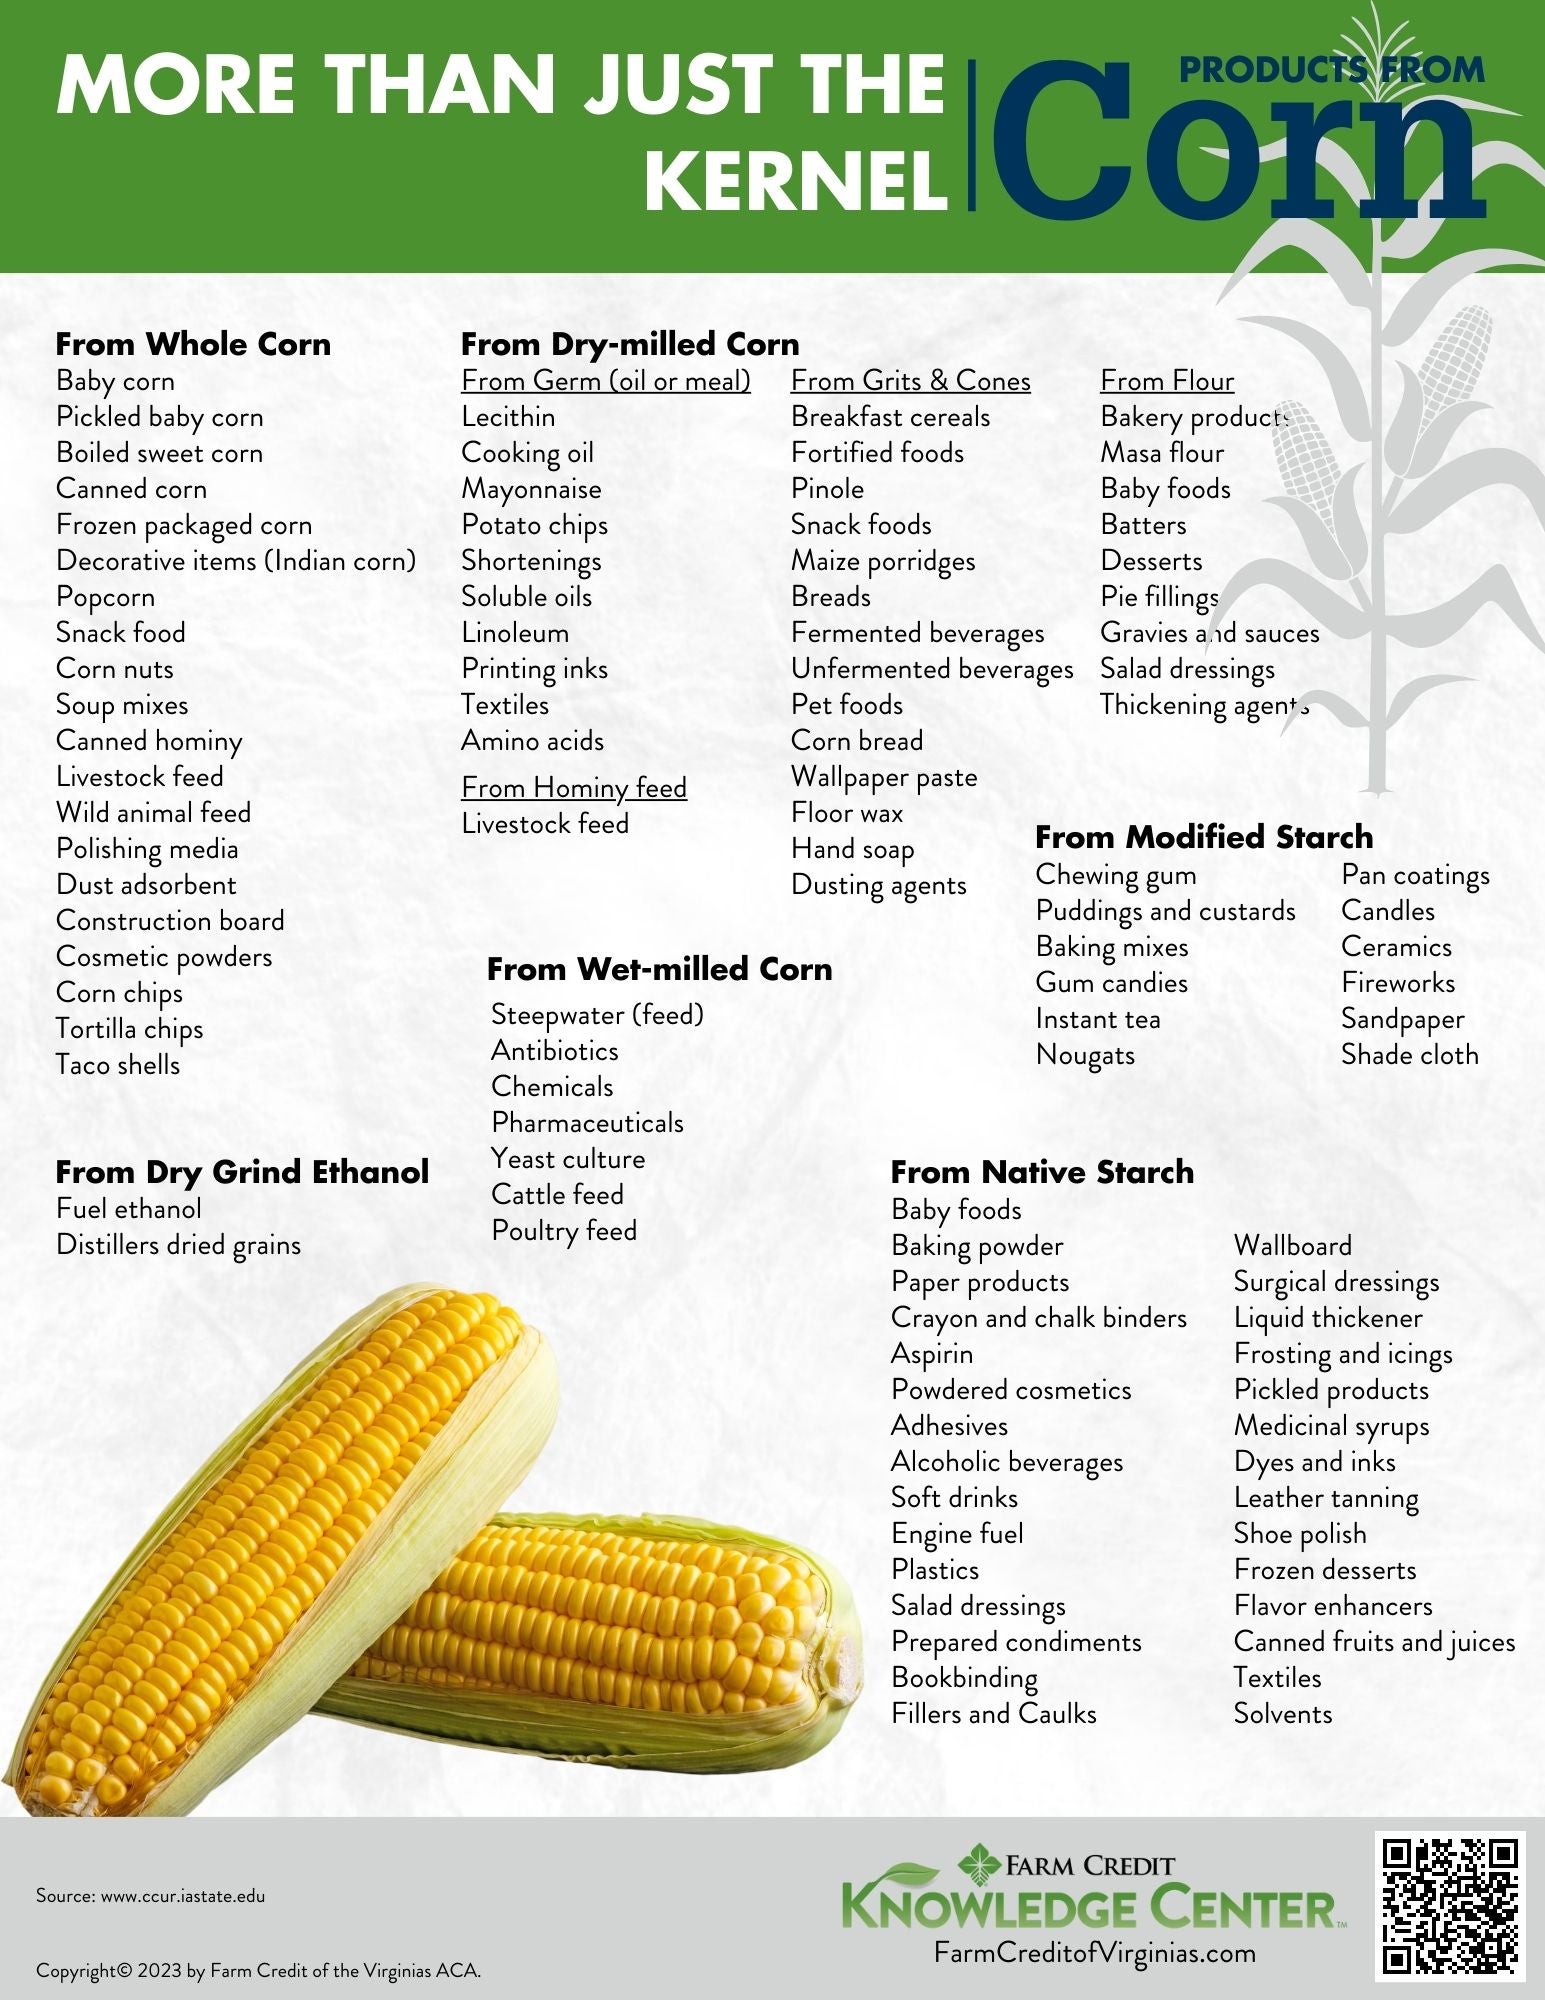 More than just the kernel products made from corn infographic